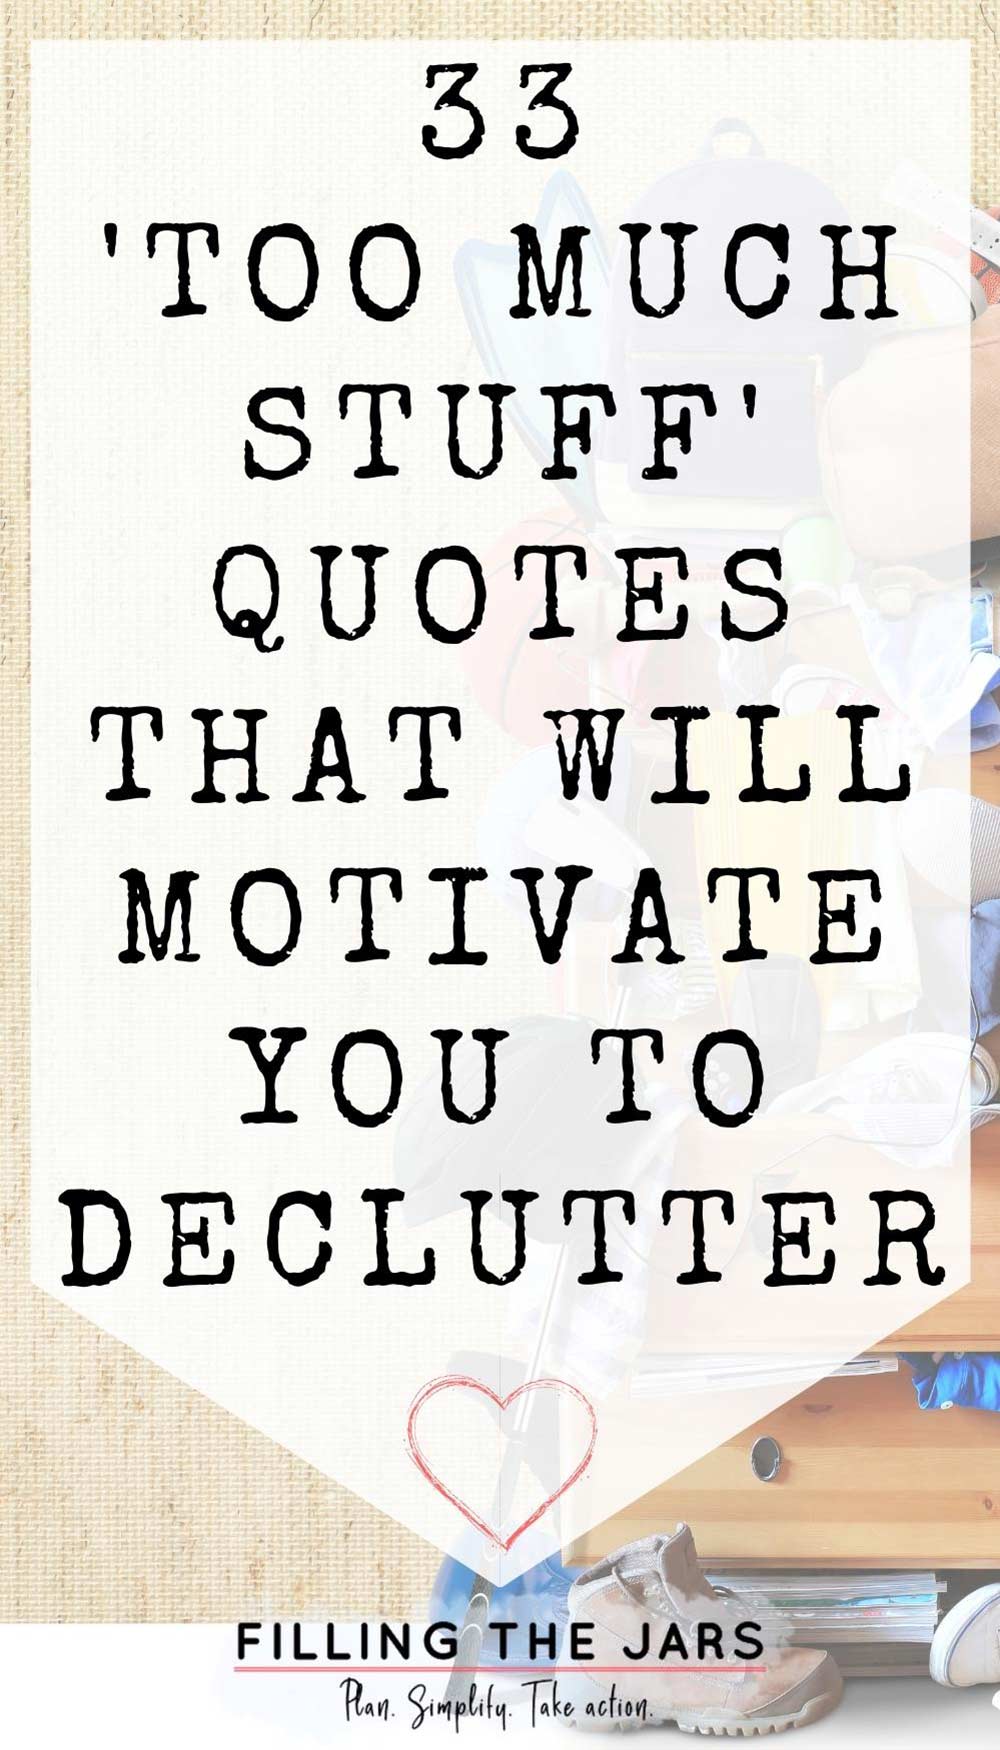 Text too much stuff quotes that will motivate you to declutter on white background over image of clutter piled on dresser against woven-look wallcovering.